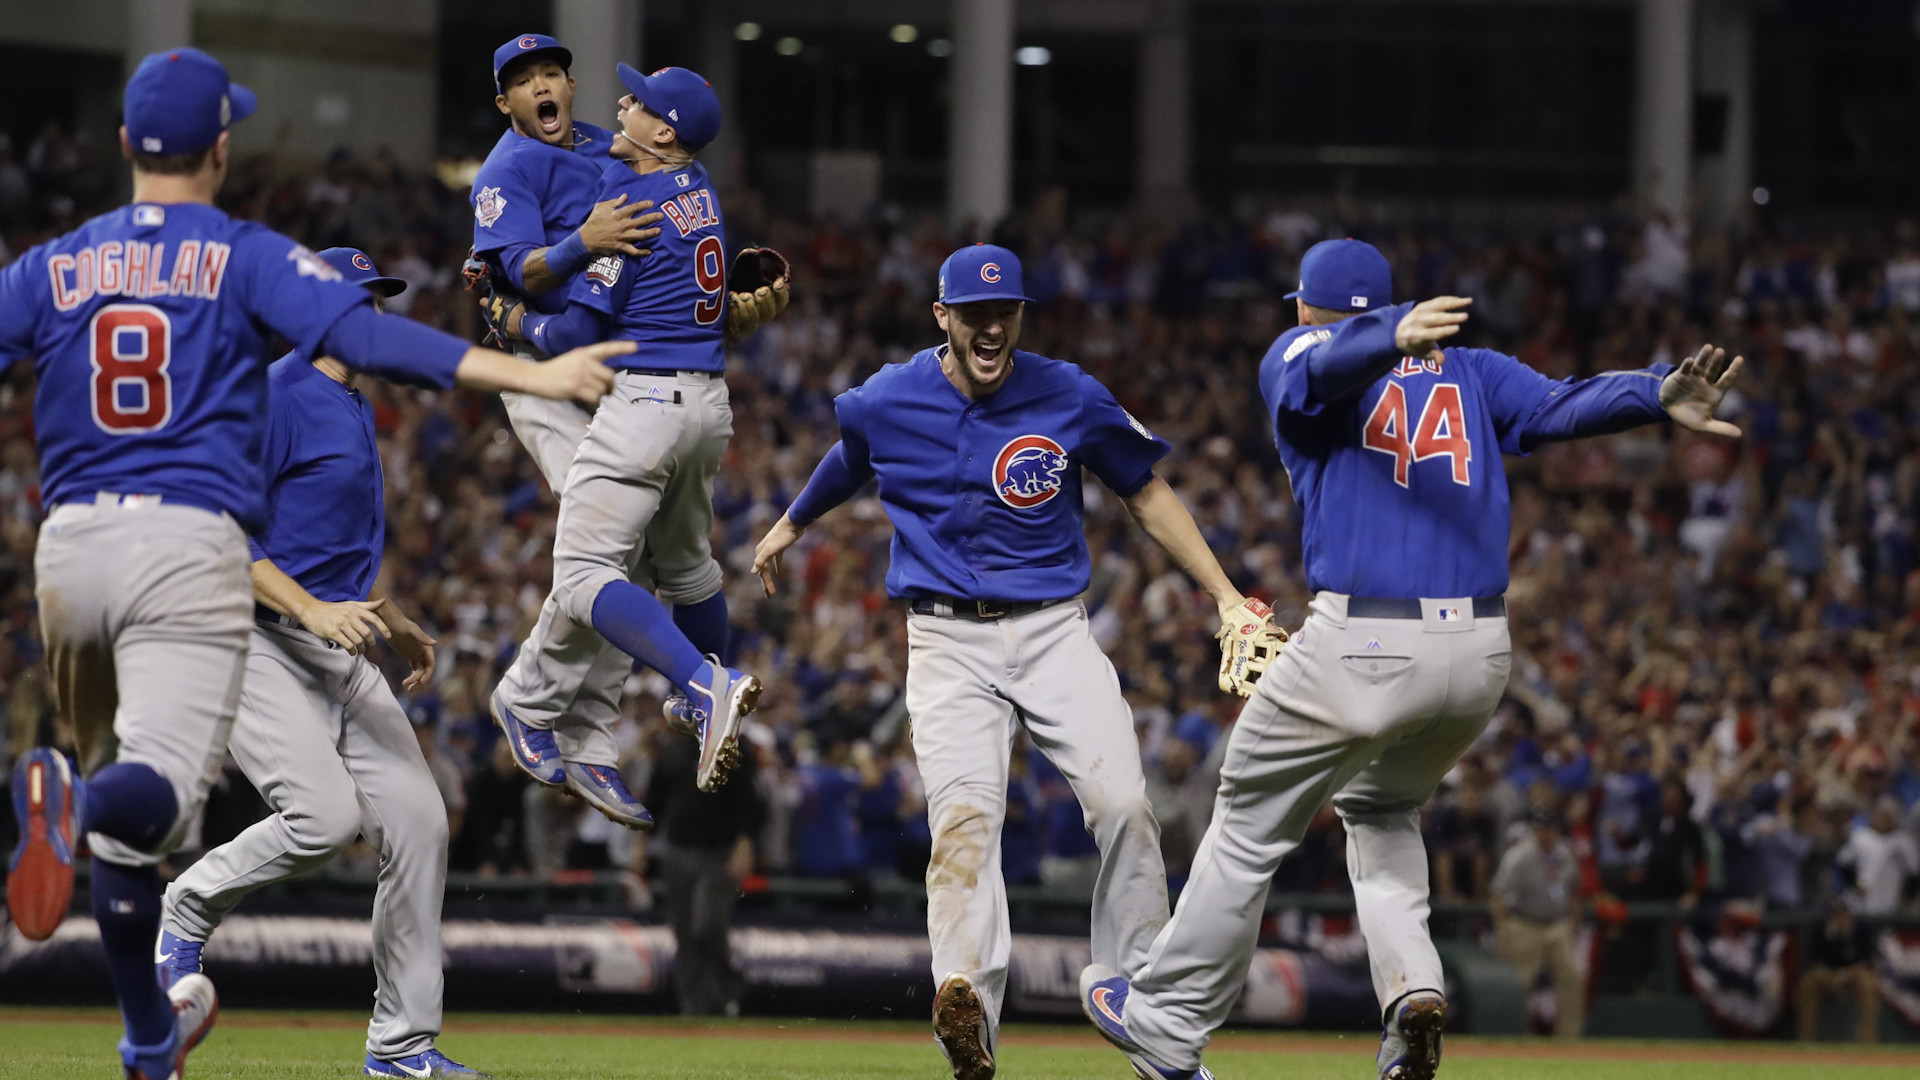 1920x1080 Chicago Cubs World Series Champions Wallpaper Great Cubs Game 7 Win In 20  Seconds orlando Sentinel